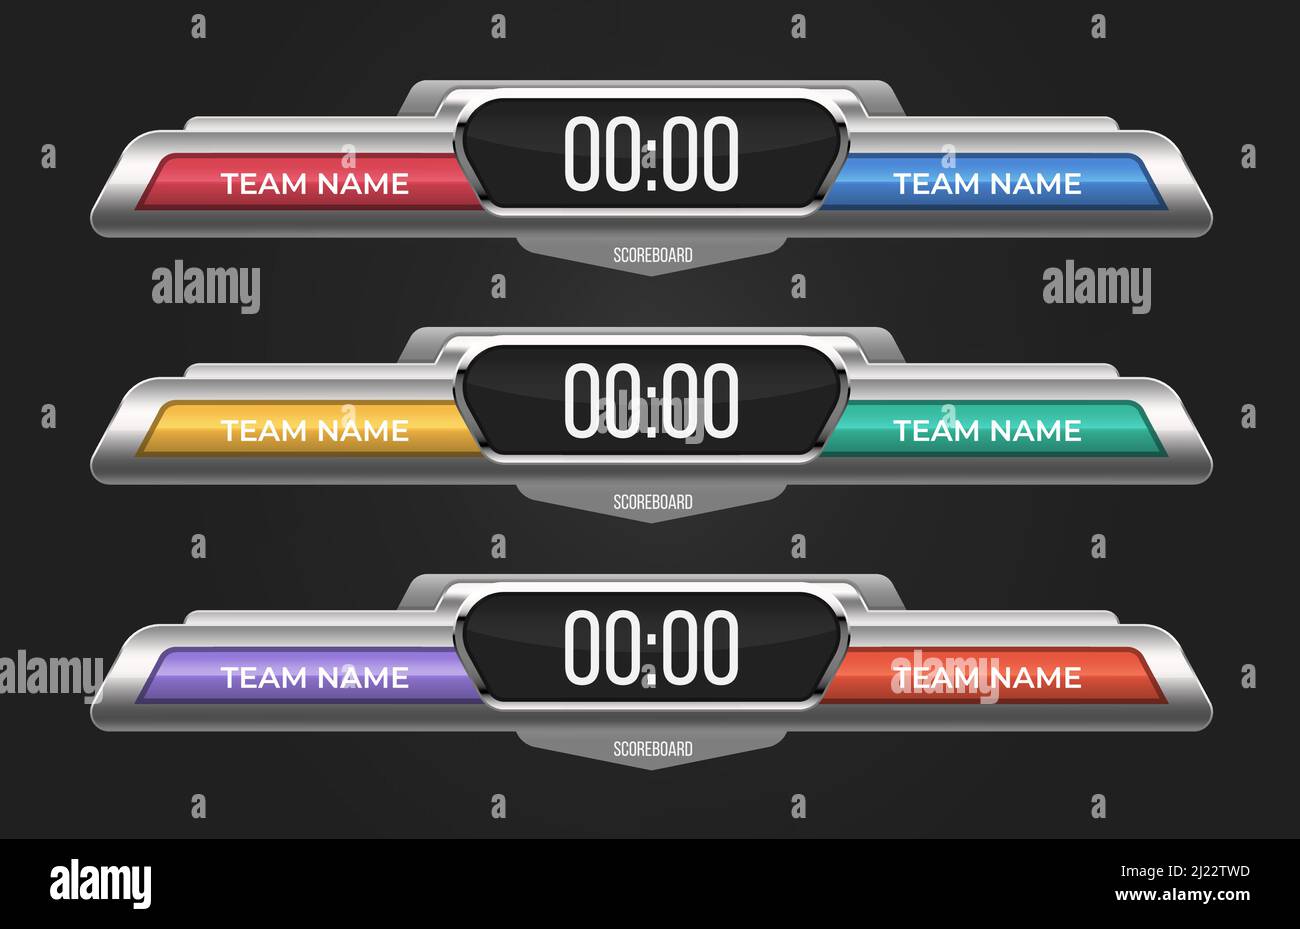 Scoreboard templates set. With electronic display for score and space for team names. Can be used for sport bars, cricket game, baseball, basketball, Stock Vector